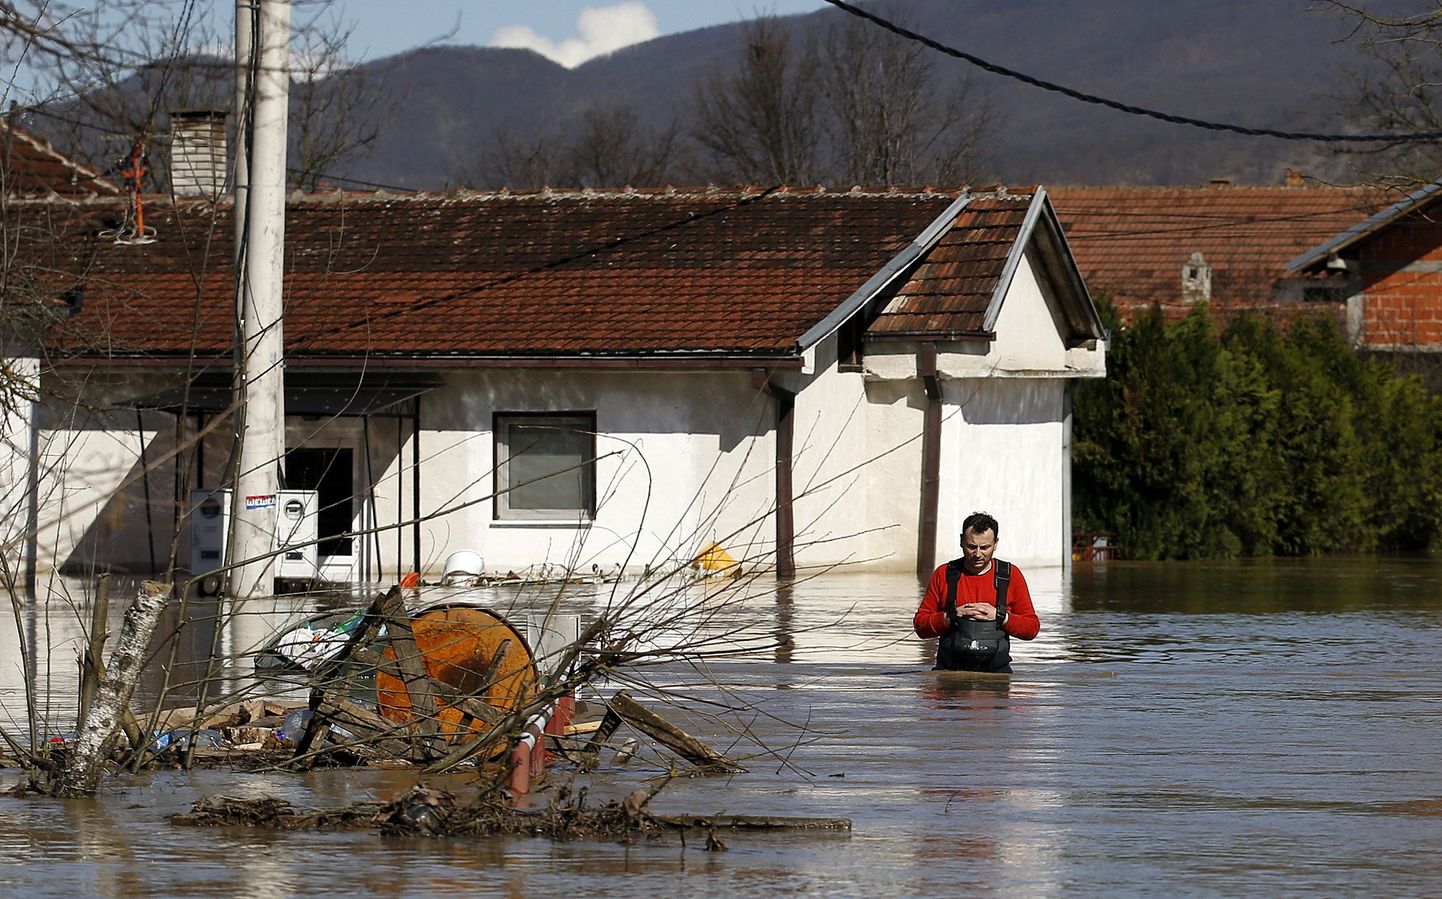 A man walks in front of a his flooded home in the village of Grdica, Serbia, Tuesday, March 8, 2016. Hundreds of people had to evacuate their homes, while hundreds of houses remained under threat, police said. In several villages and towns, entire areas have been left without electricity or water, and some schools canceled classes for the day. (AP Photo/Darko Vojinovic)